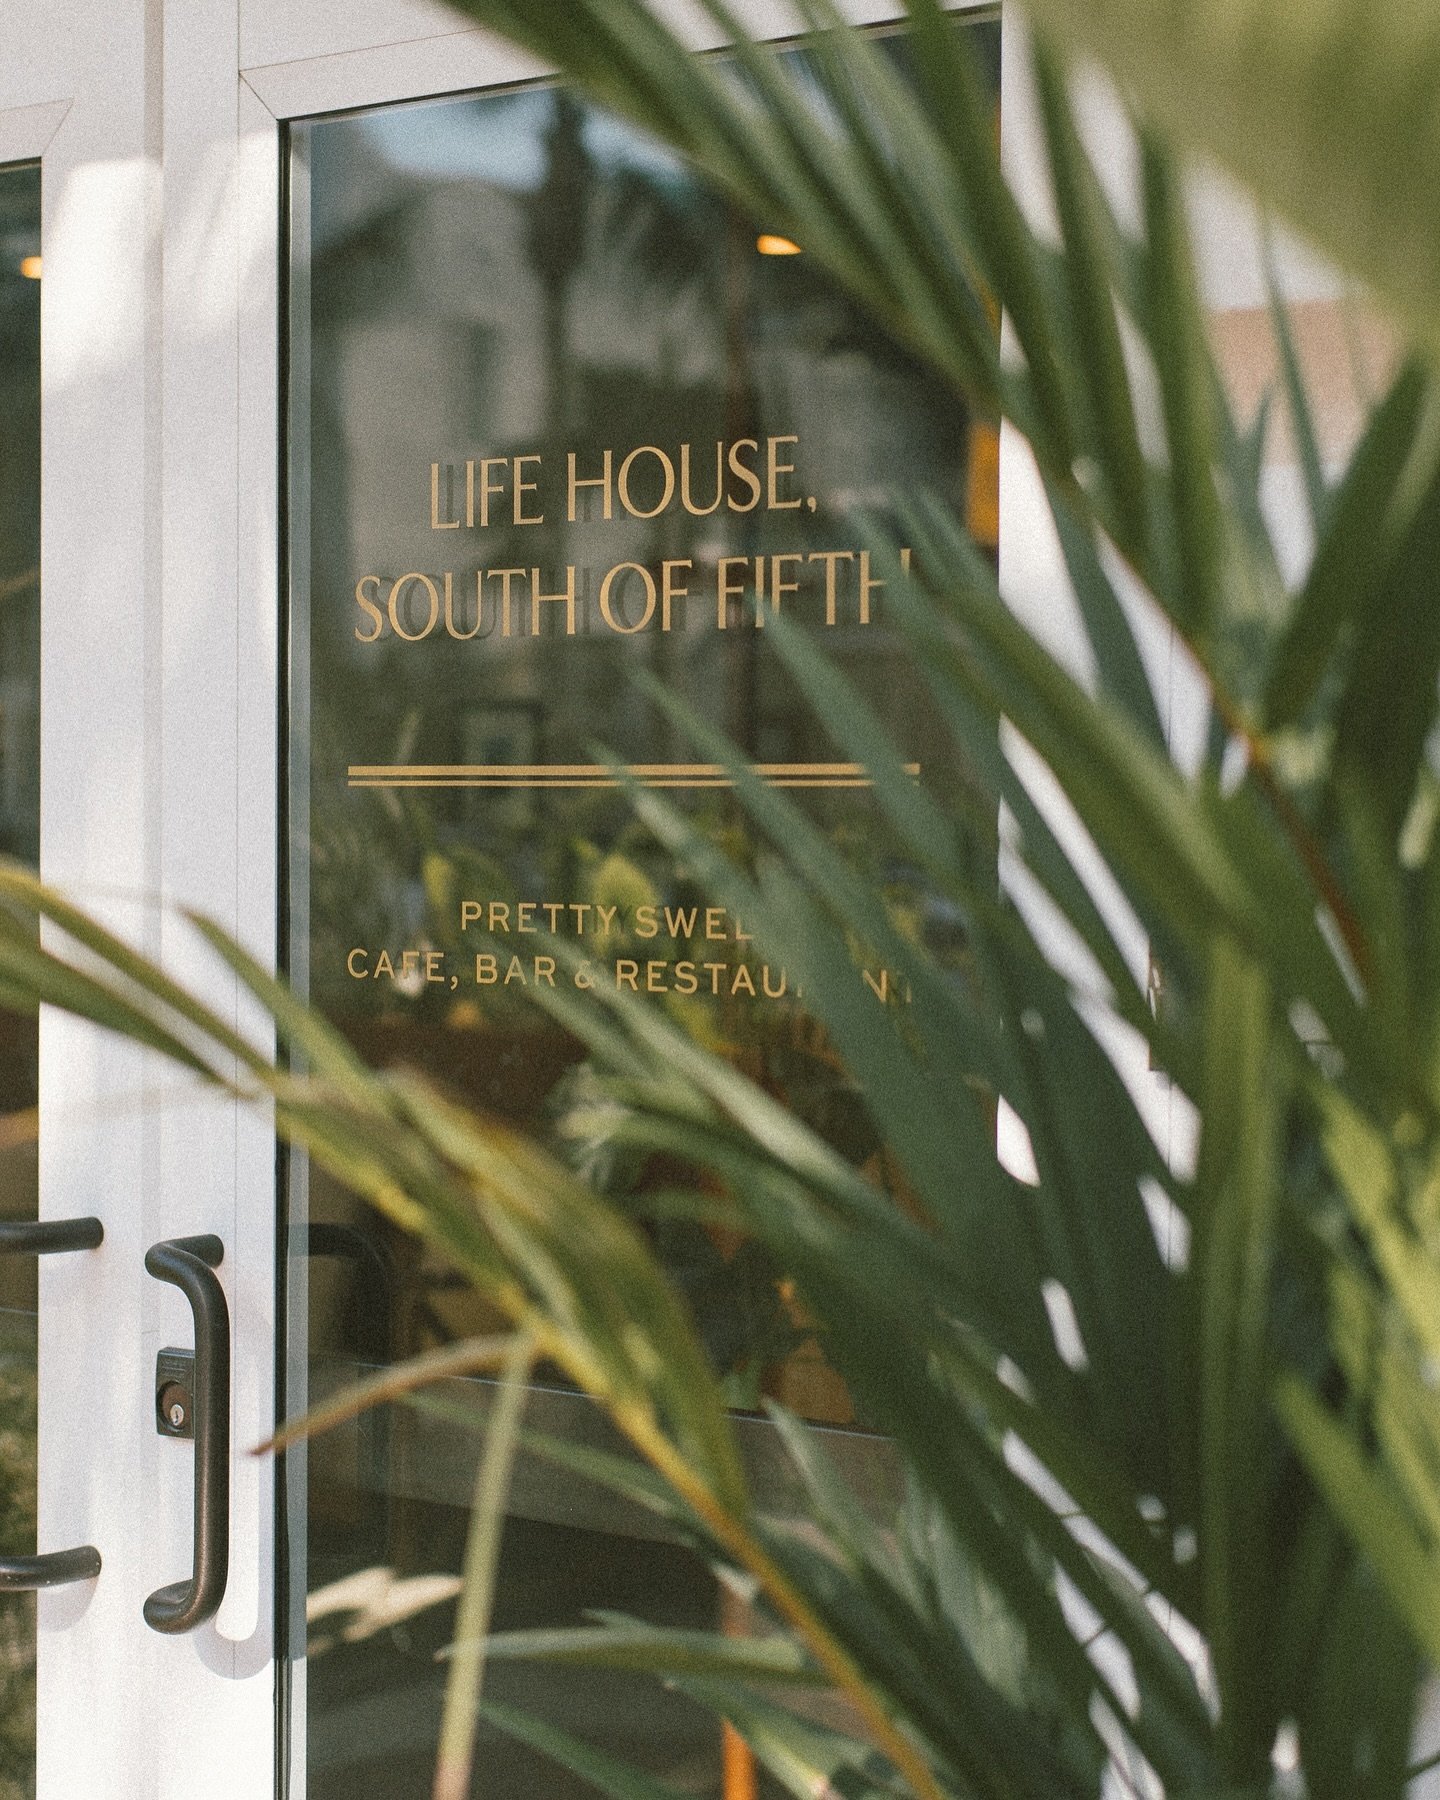 Had the best stay in Miami Beach ☼ Thank you for taking such incredible care of us @lifehousehotels South of Fifth!

#hotel #resortstyle #luxuryresort #resort #hoteles #hotelier #travelphotography #travelphotographer #beautifulhotels #beachesandresor